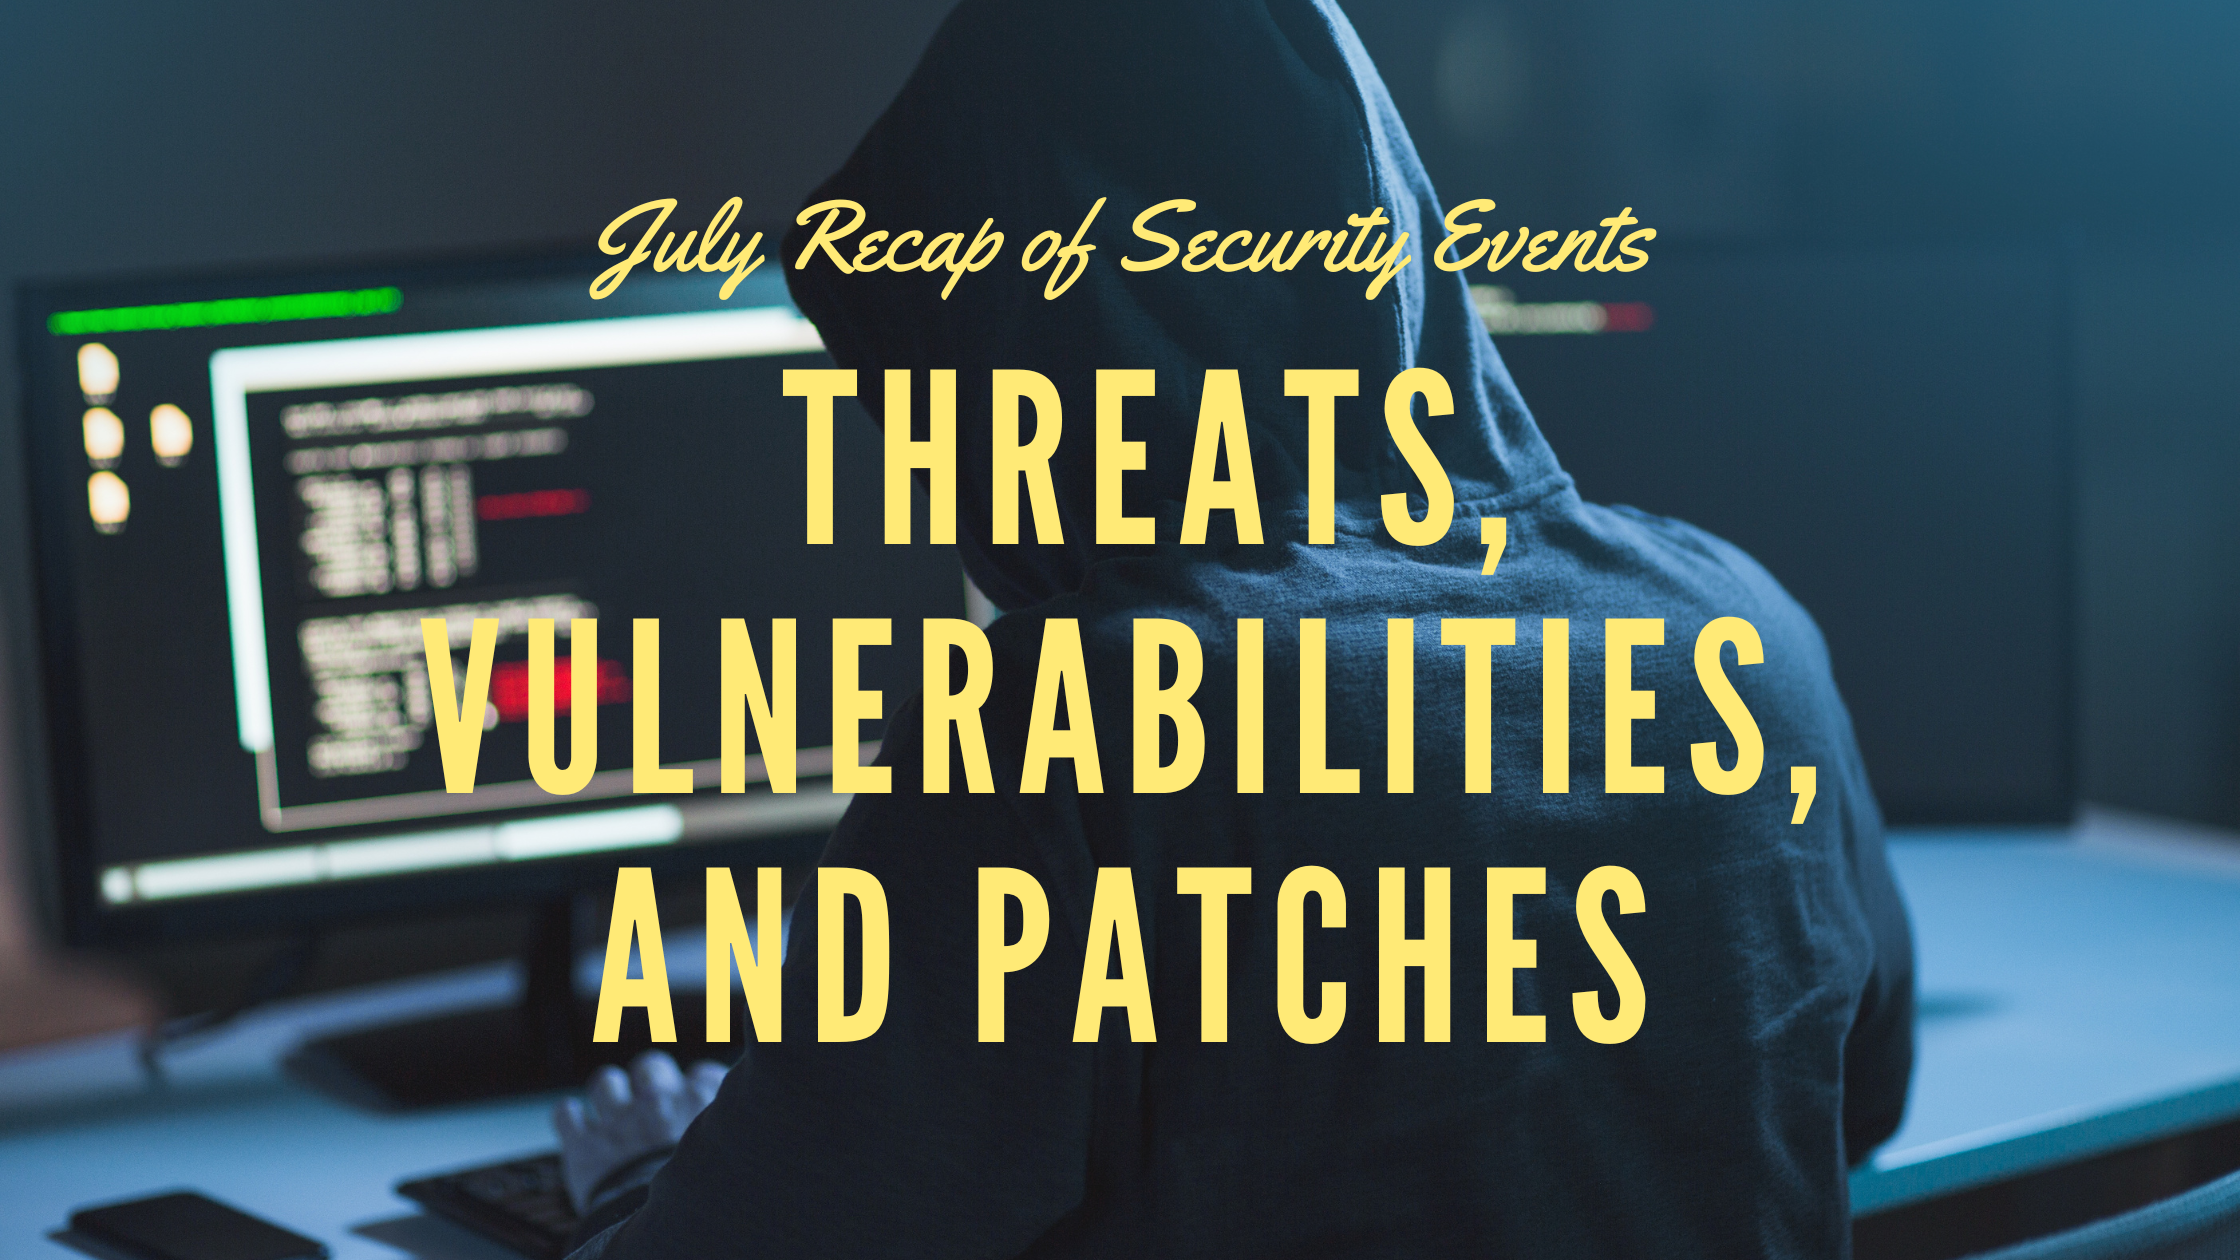 [Security Tip] July Security Threats Summarized